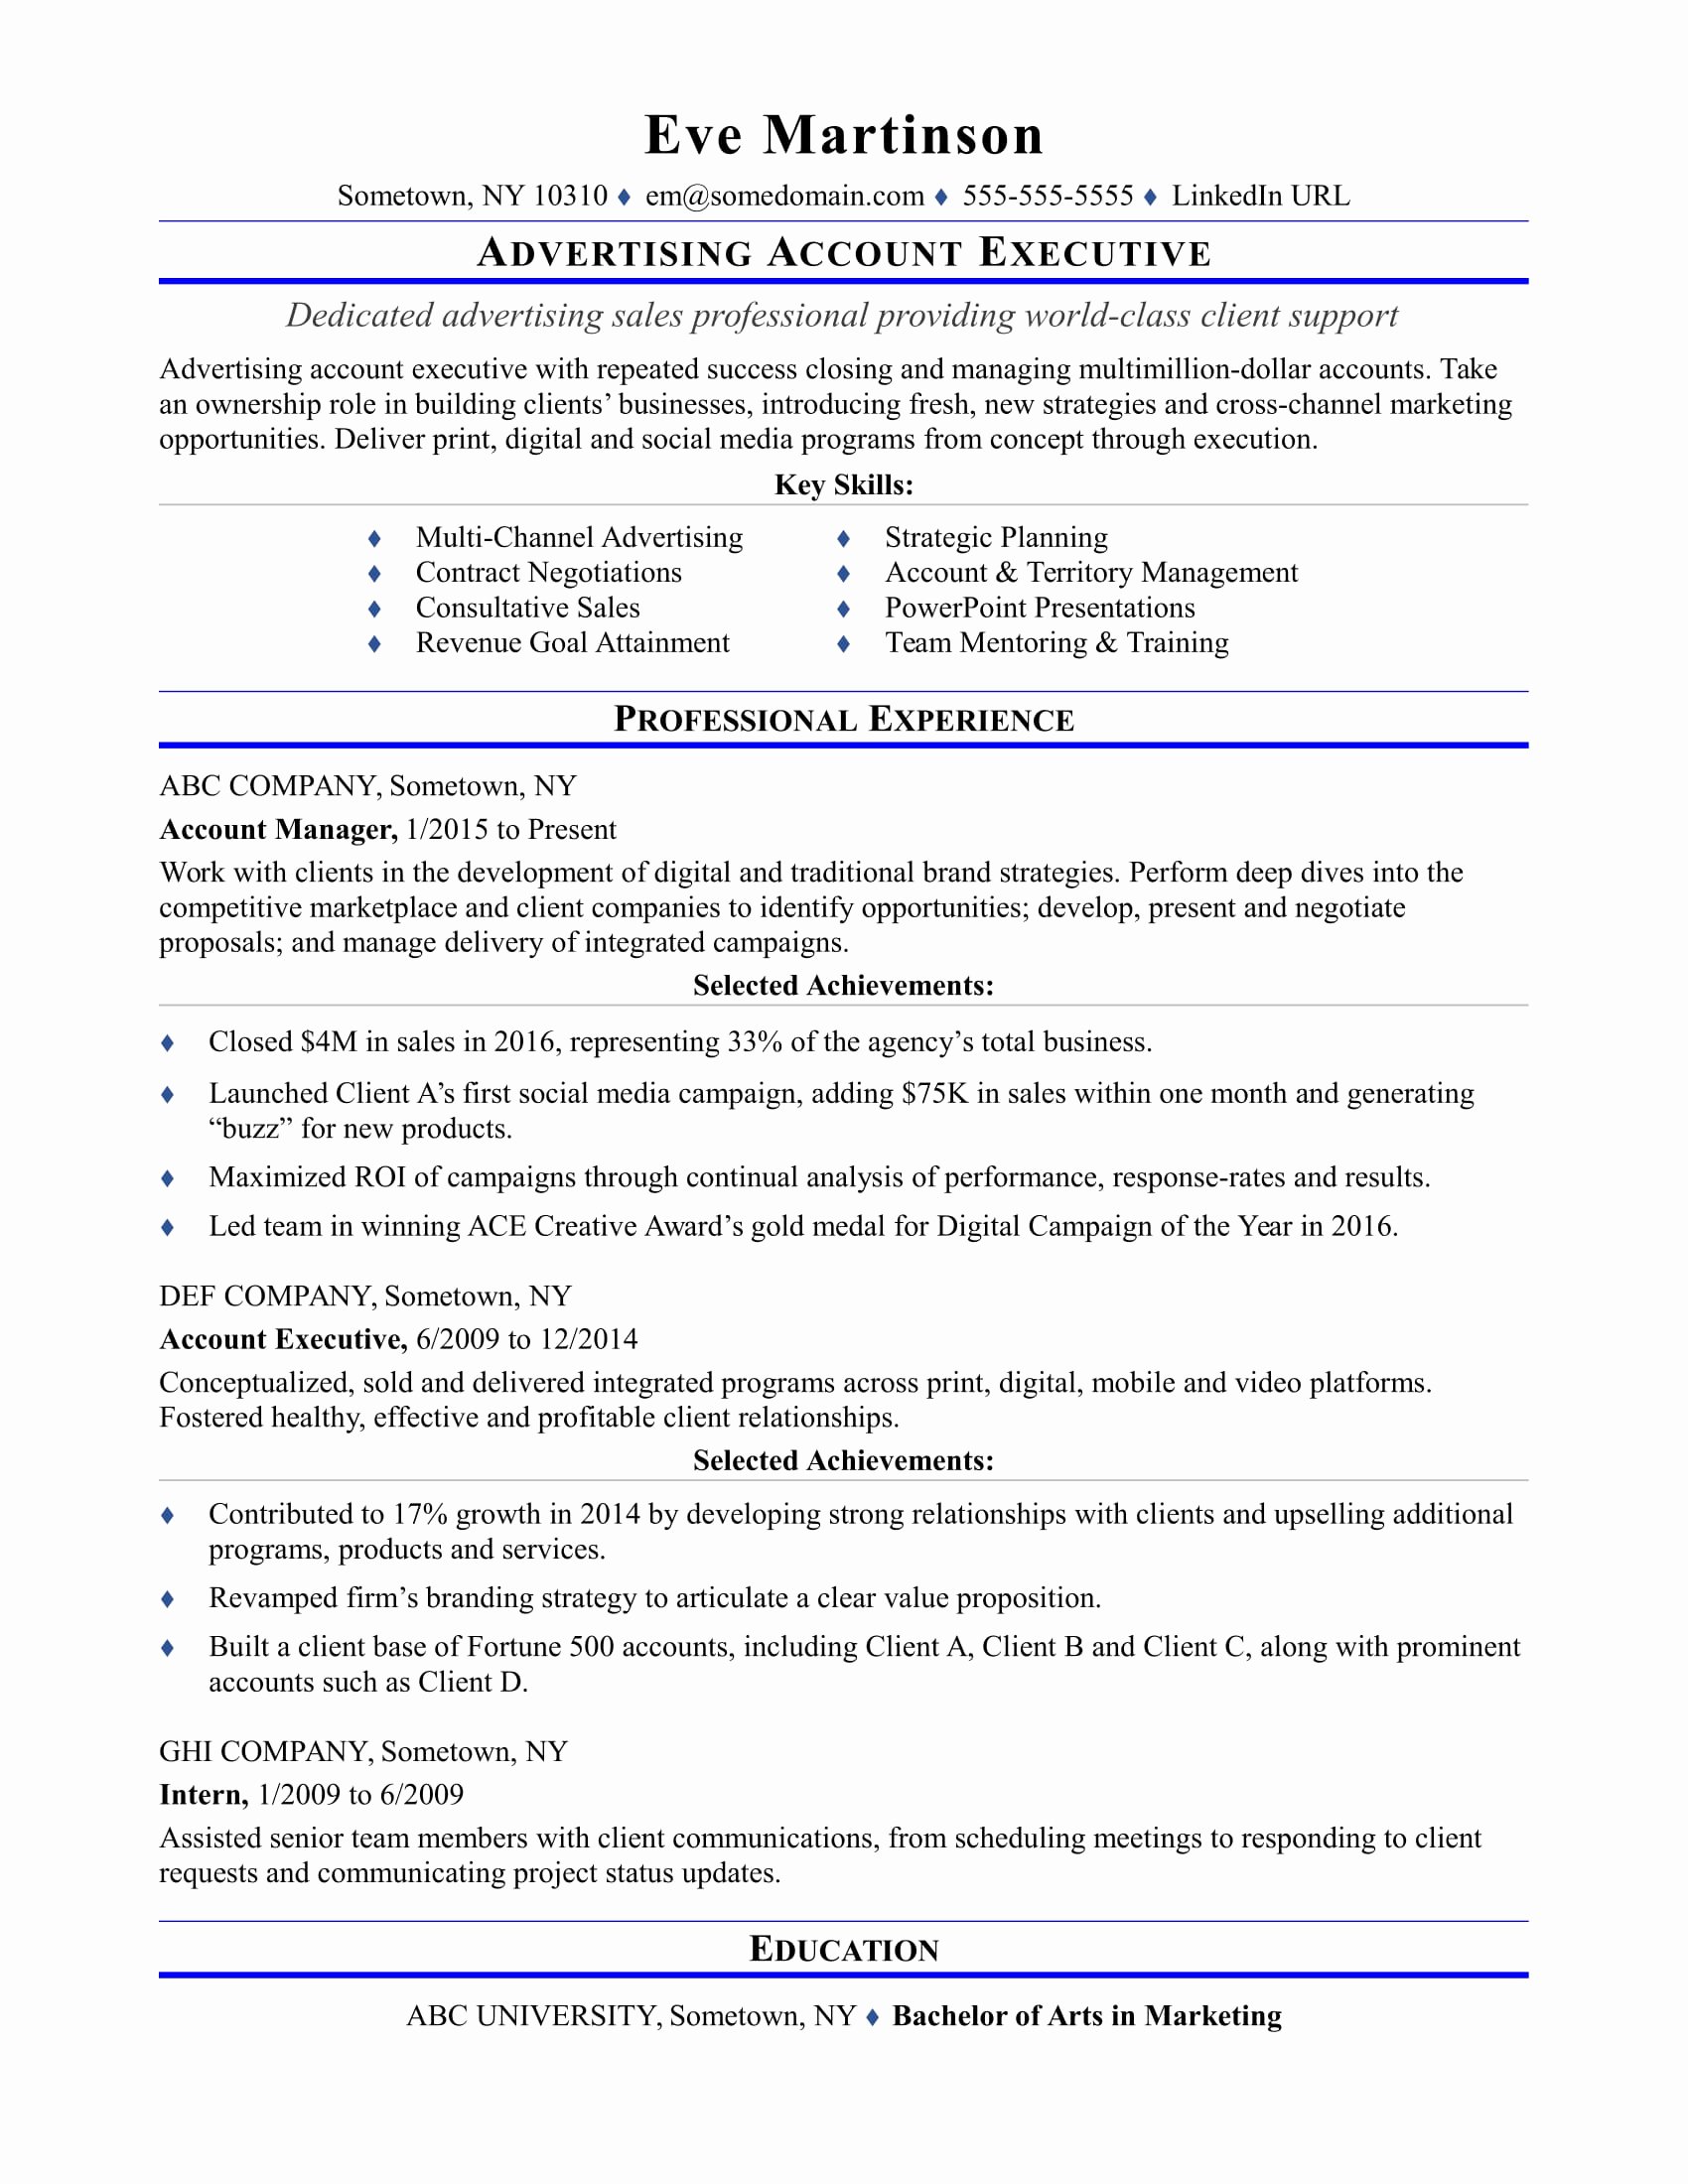 Sample Resume for An Advertising Account Executive